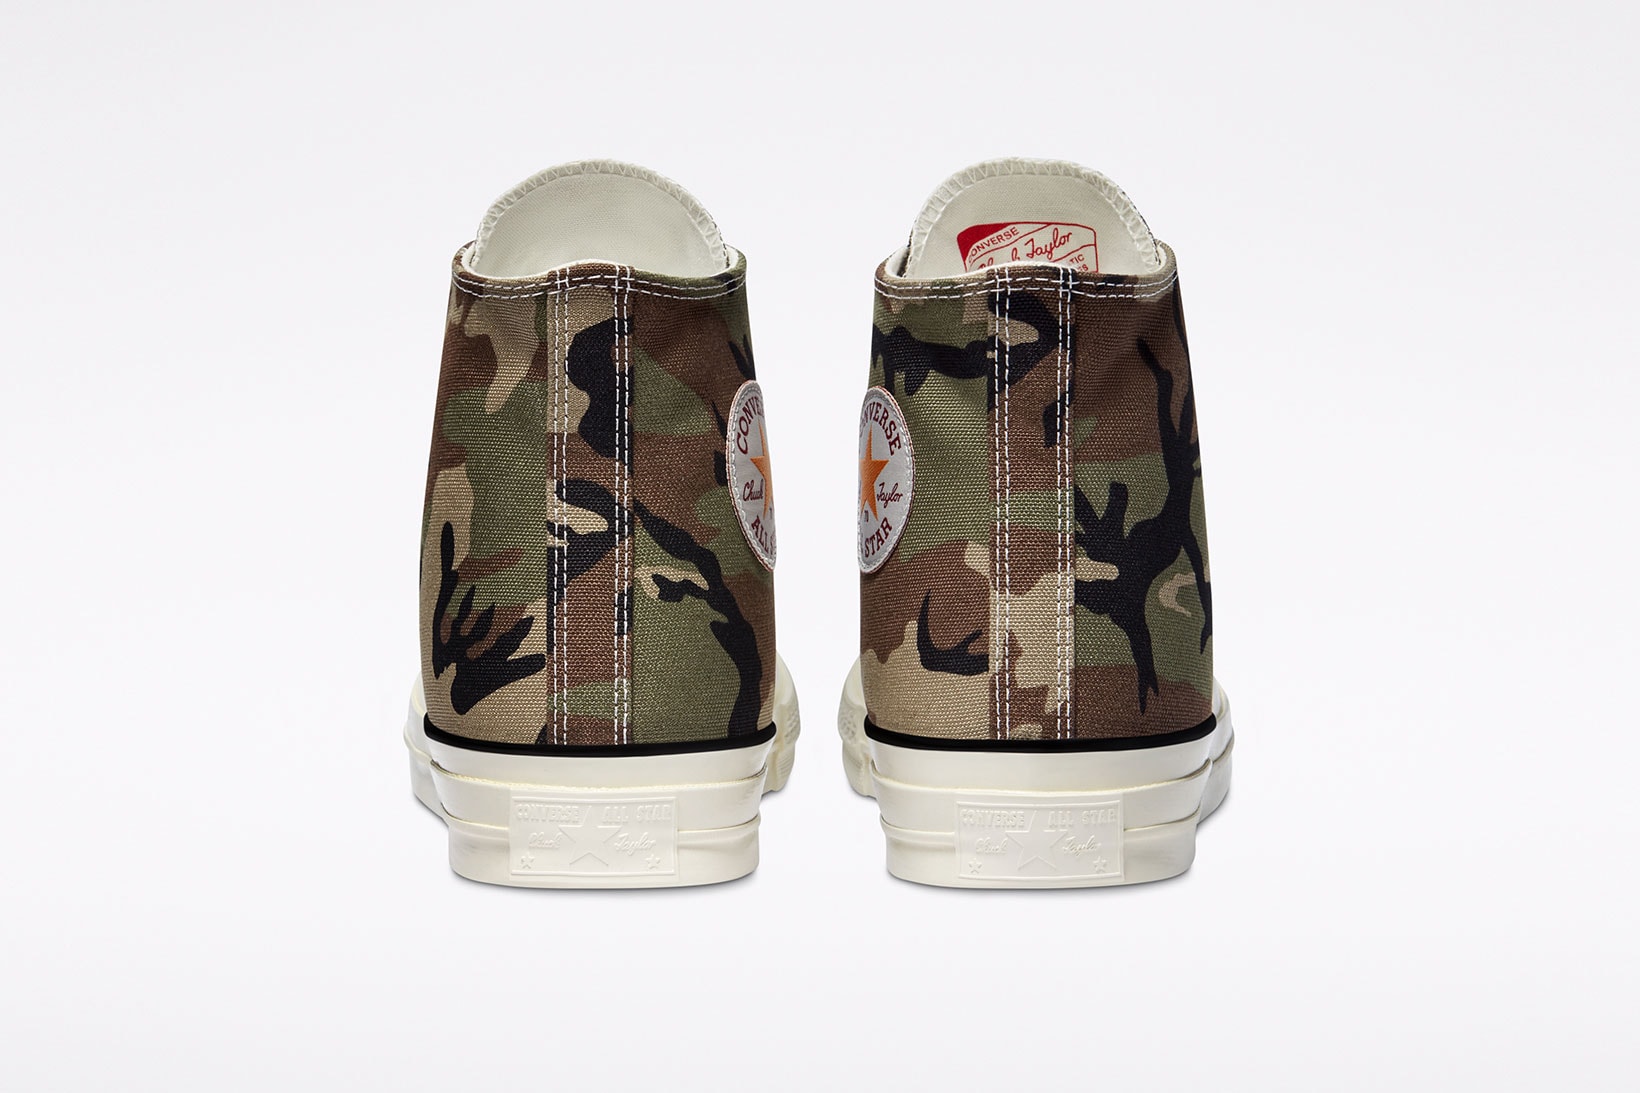 carhartt wip converse chuck 70 icons collaboration sneakers camouflage pattern back rear heel